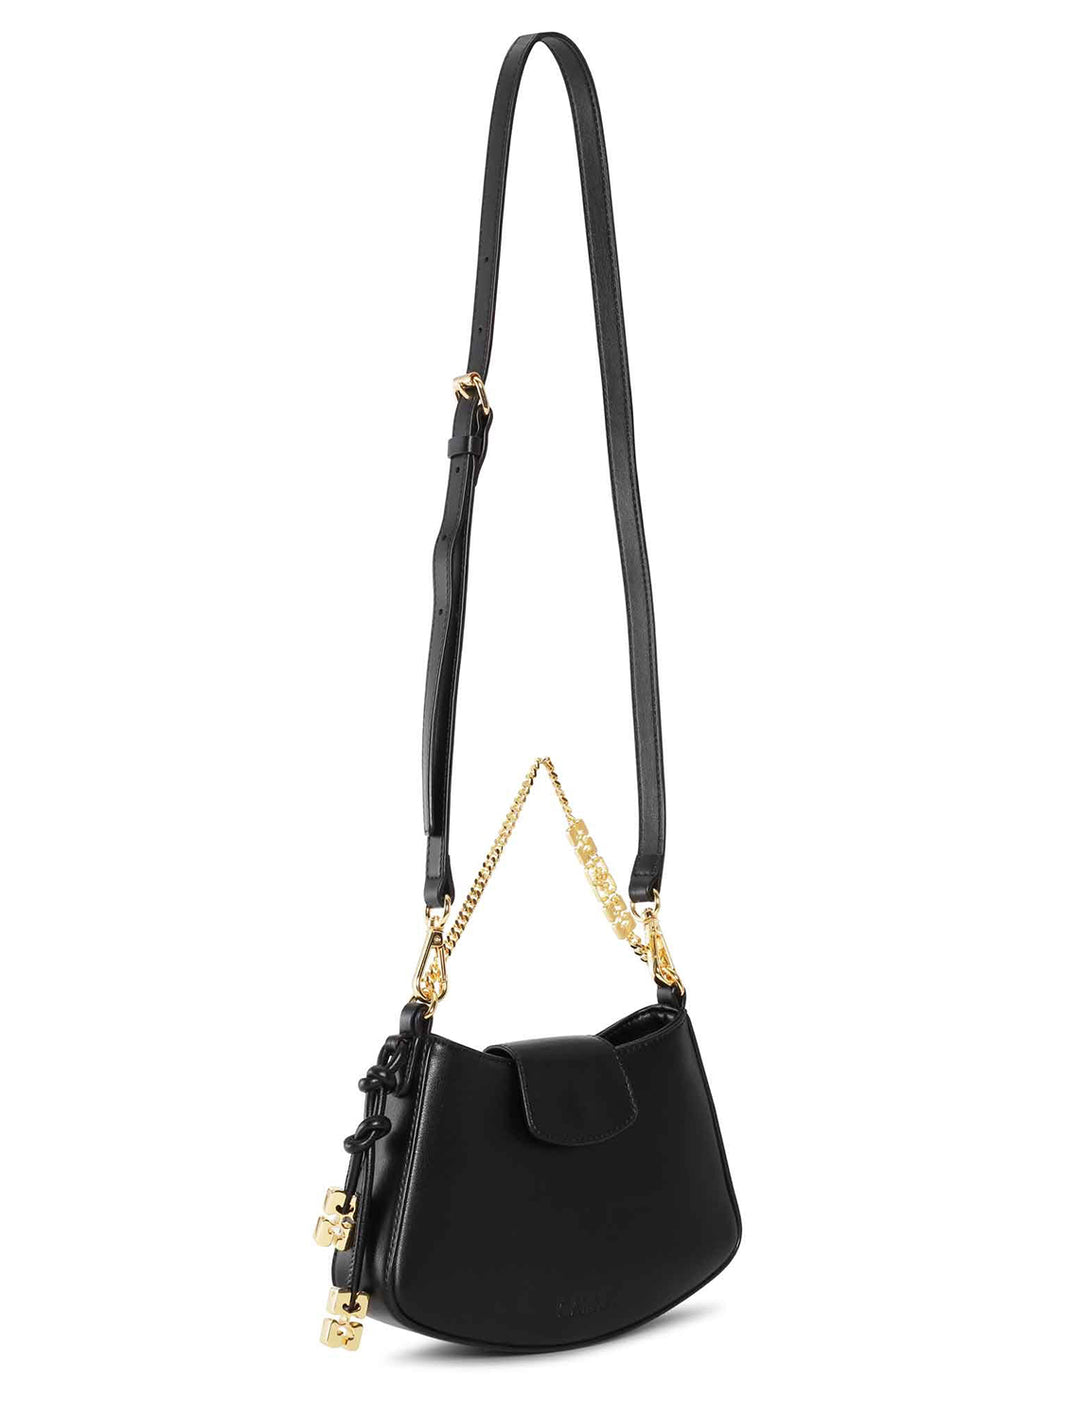 Front angle view of GANNI's ganni mini swing crossbody bag in black with shoulder strap.